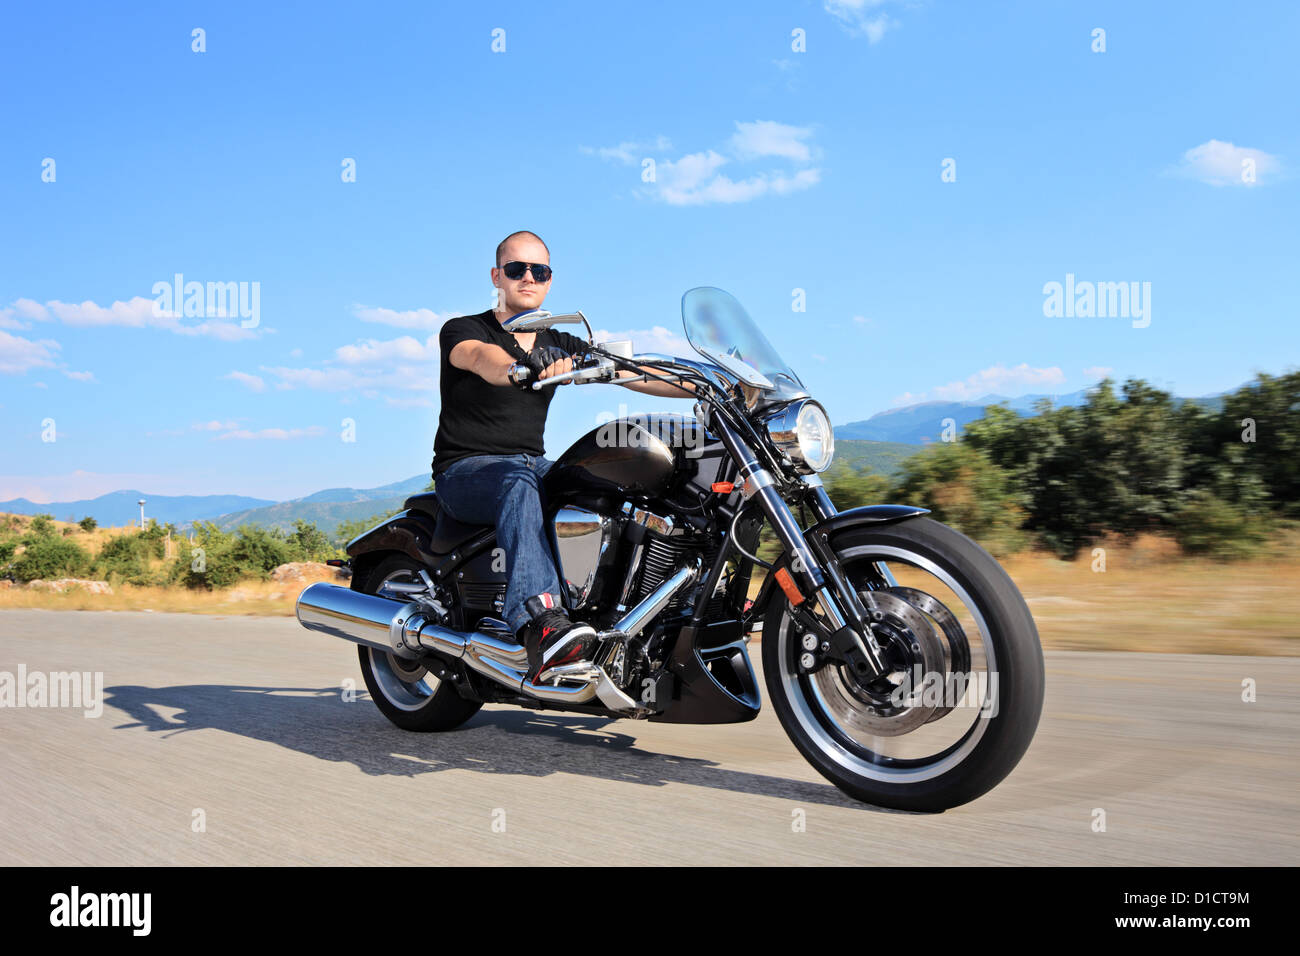 A young biker riding a customized motorcycle on an open road Stock Photo